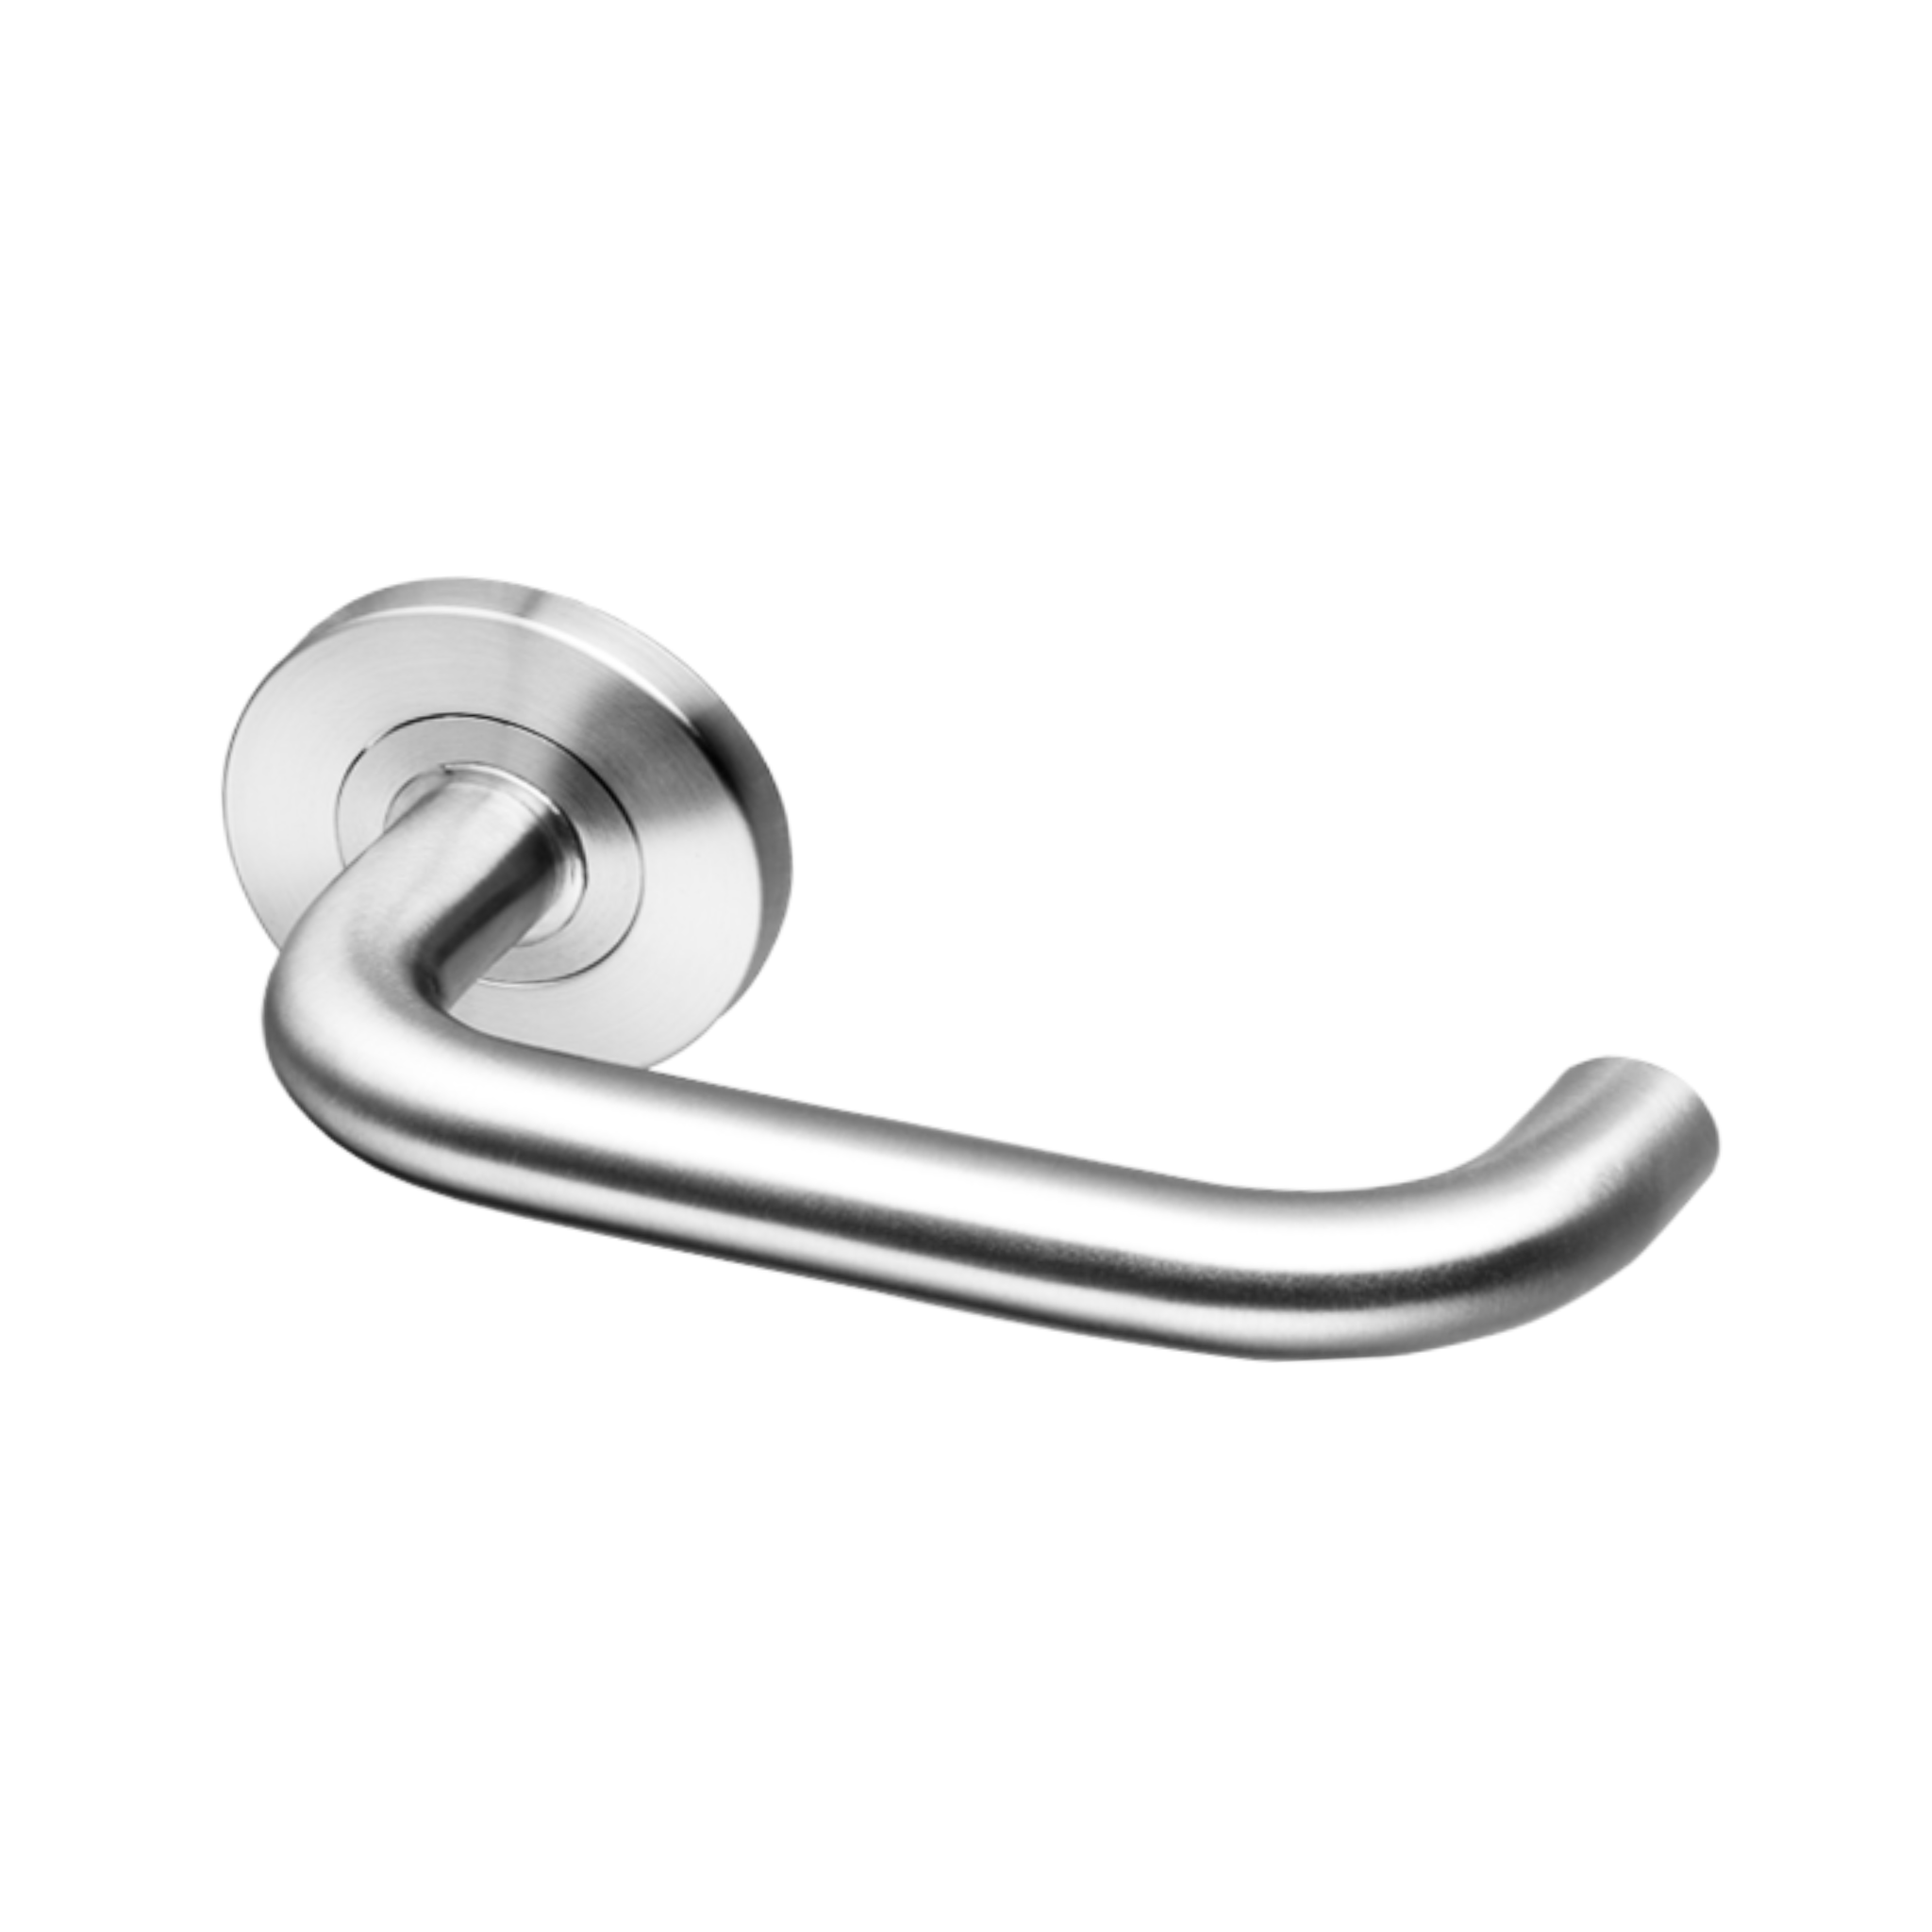 Coupé Kiruna -Rose, Lever Handles, Tubular, Round Rose, With Escutcheons, Stainless Steel, QS